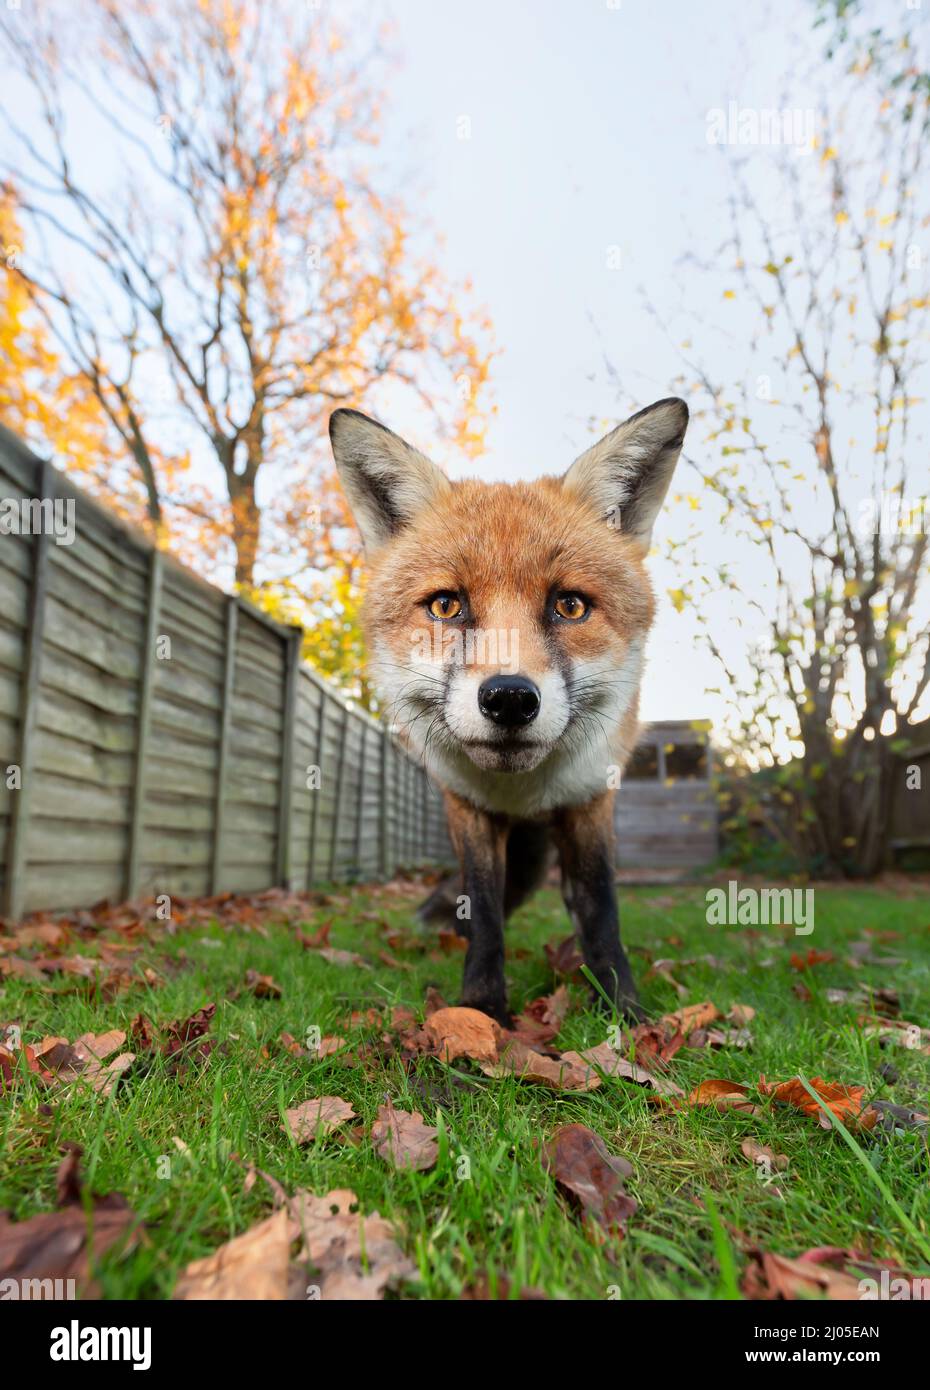 Close up of a red fox standing among autumn leaves, UK. Stock Photo